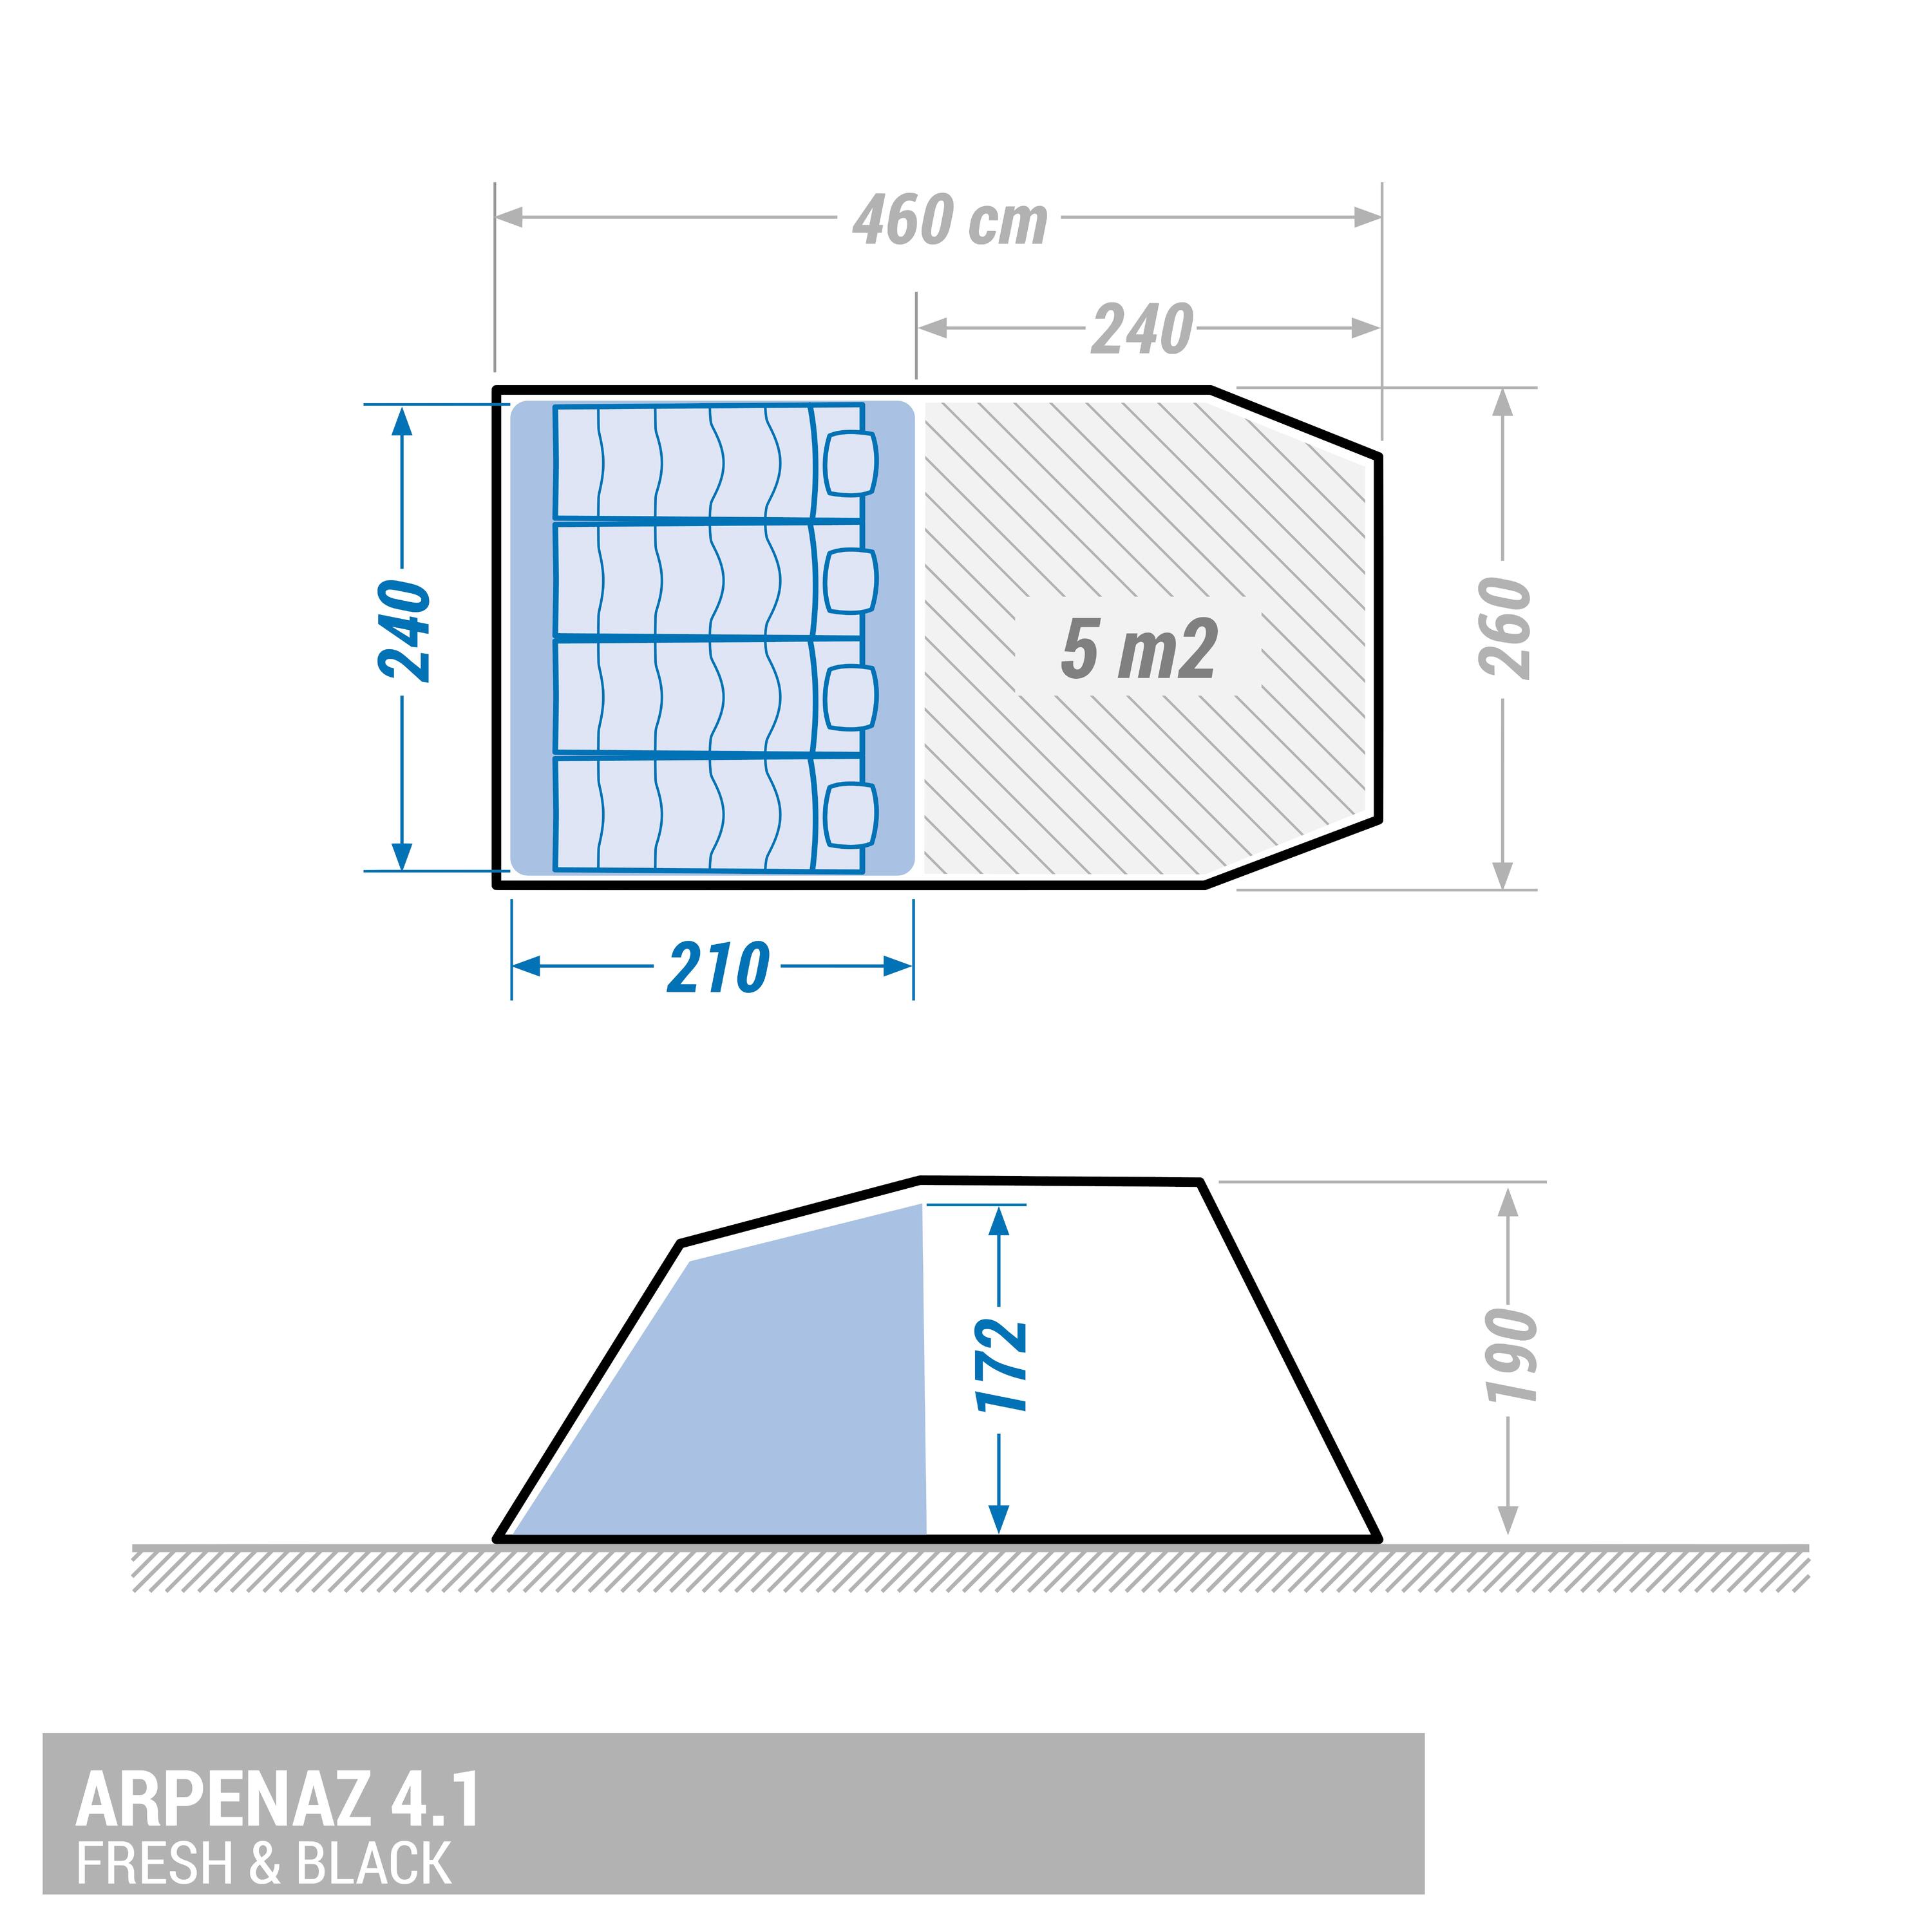 BEDROOM AND GROUNDSHEET - SPARE PART FOR THE ARPENAZ 4.1 FRESH&BLACK TENT 2/2